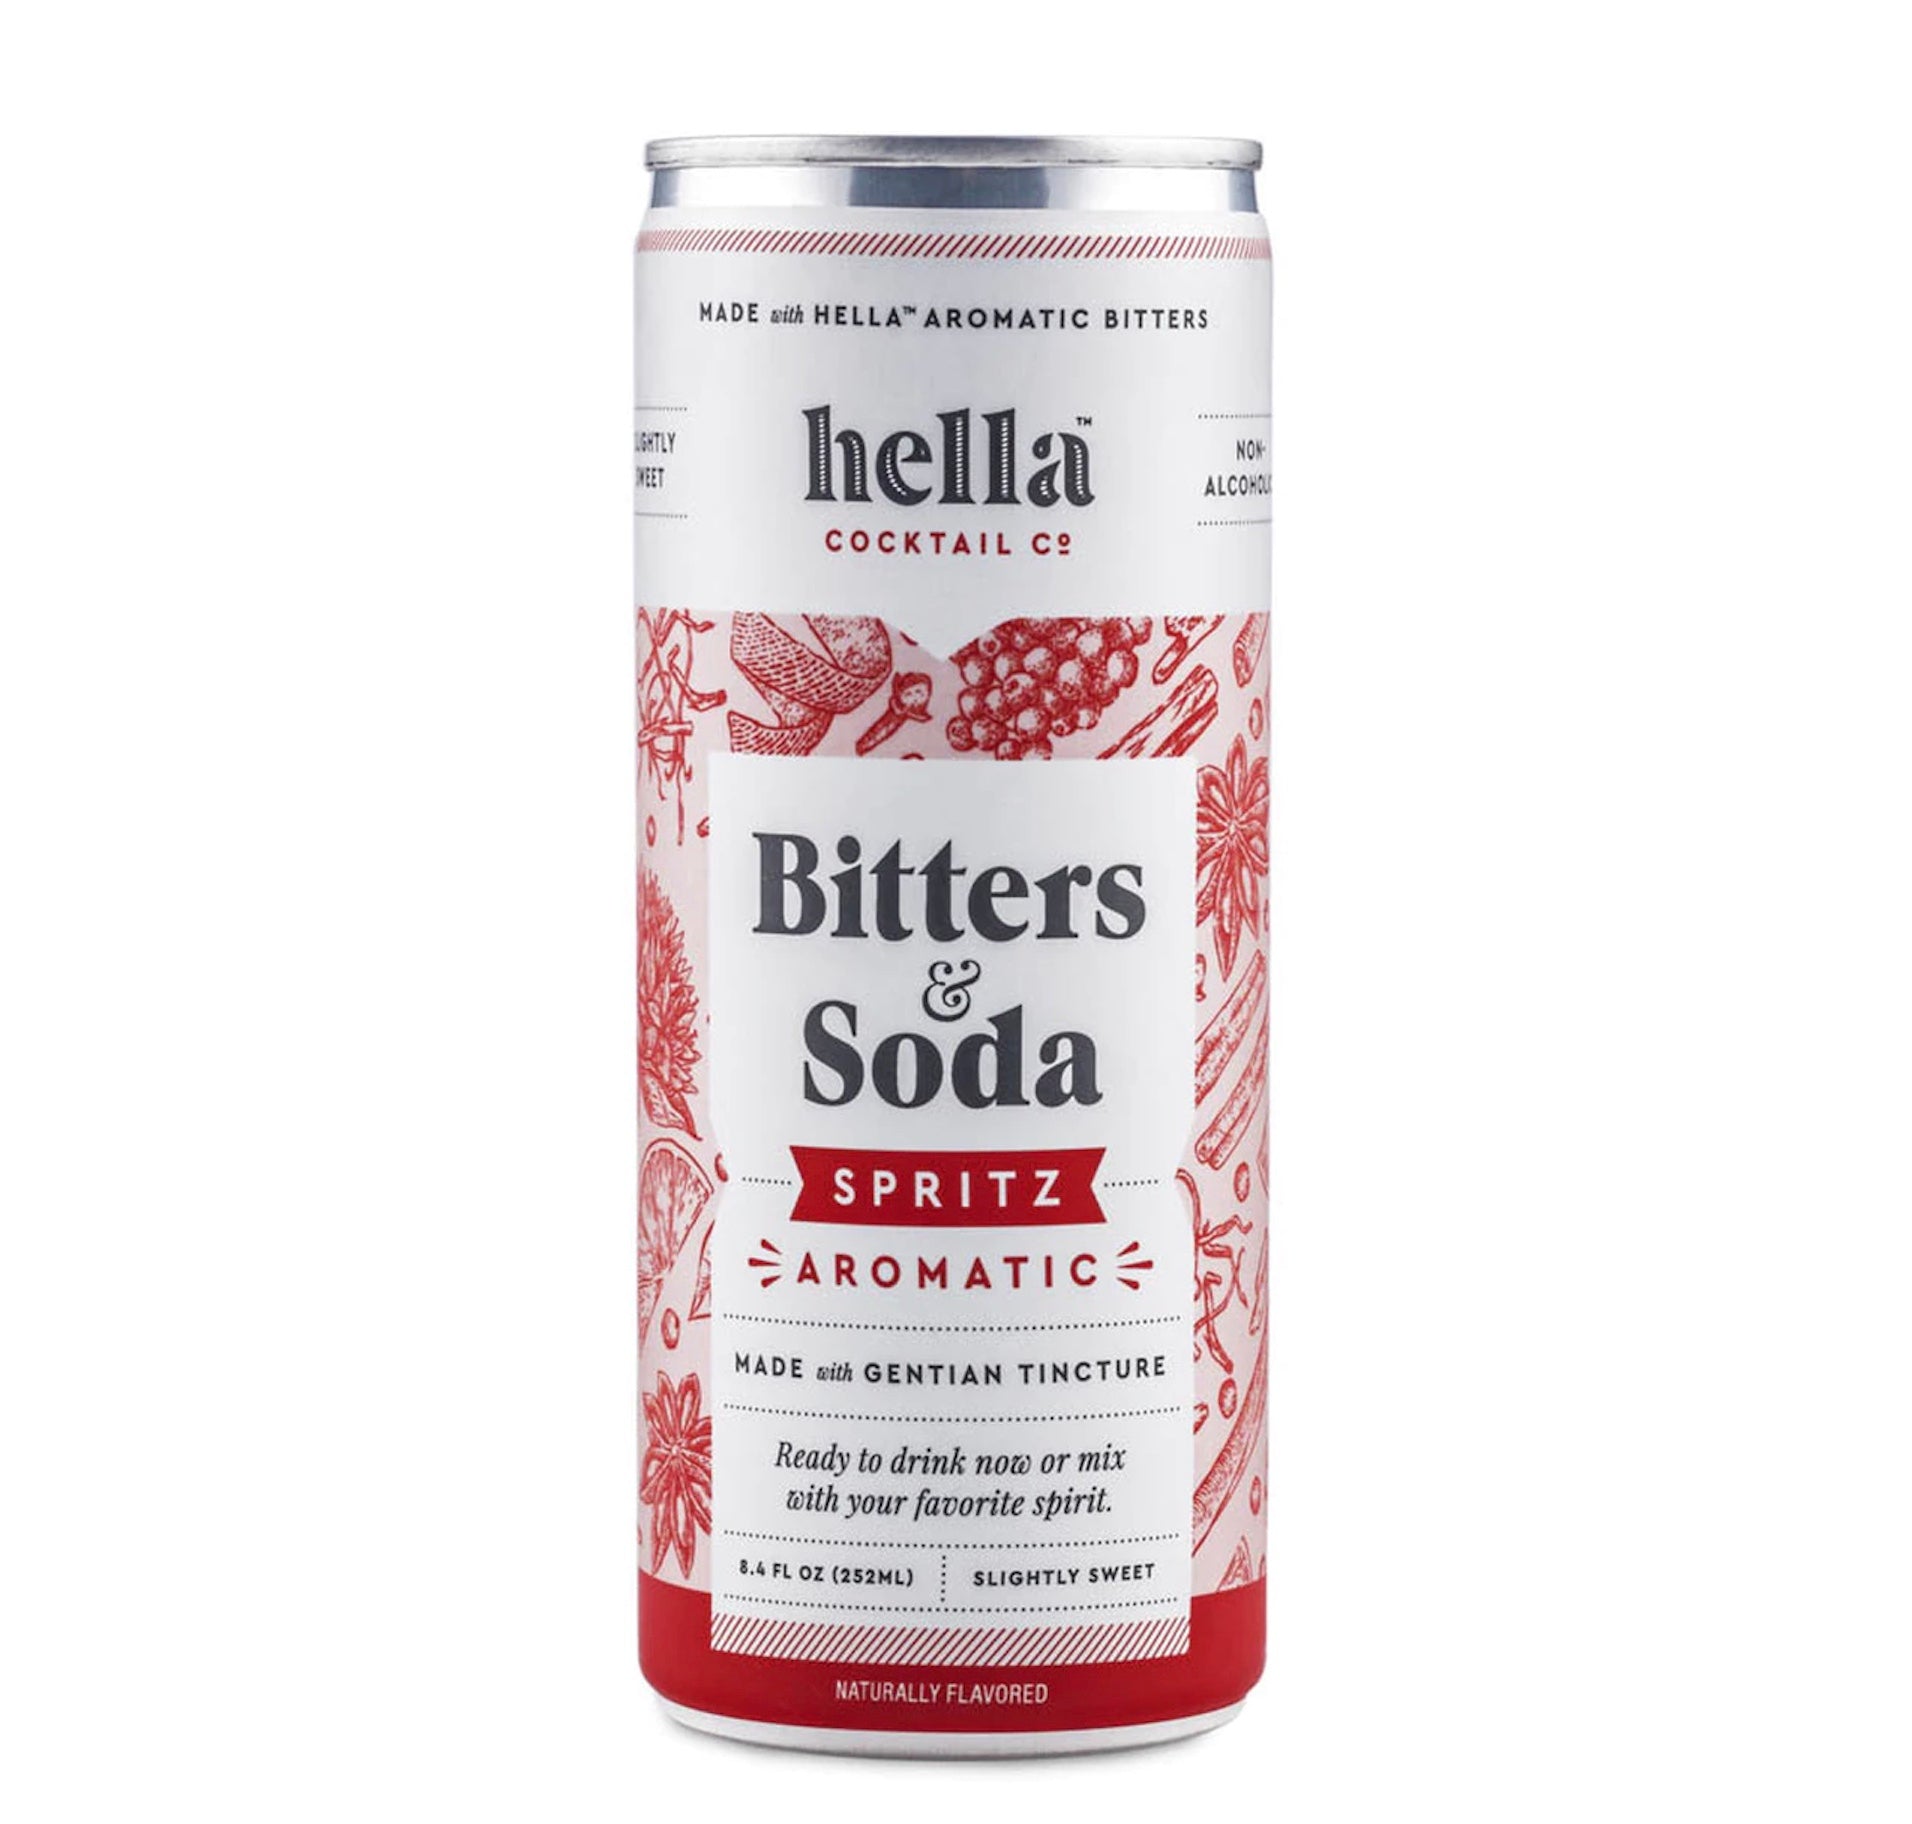 Hella Bitters & Soda Spritz Aromatic 4 pack Cans